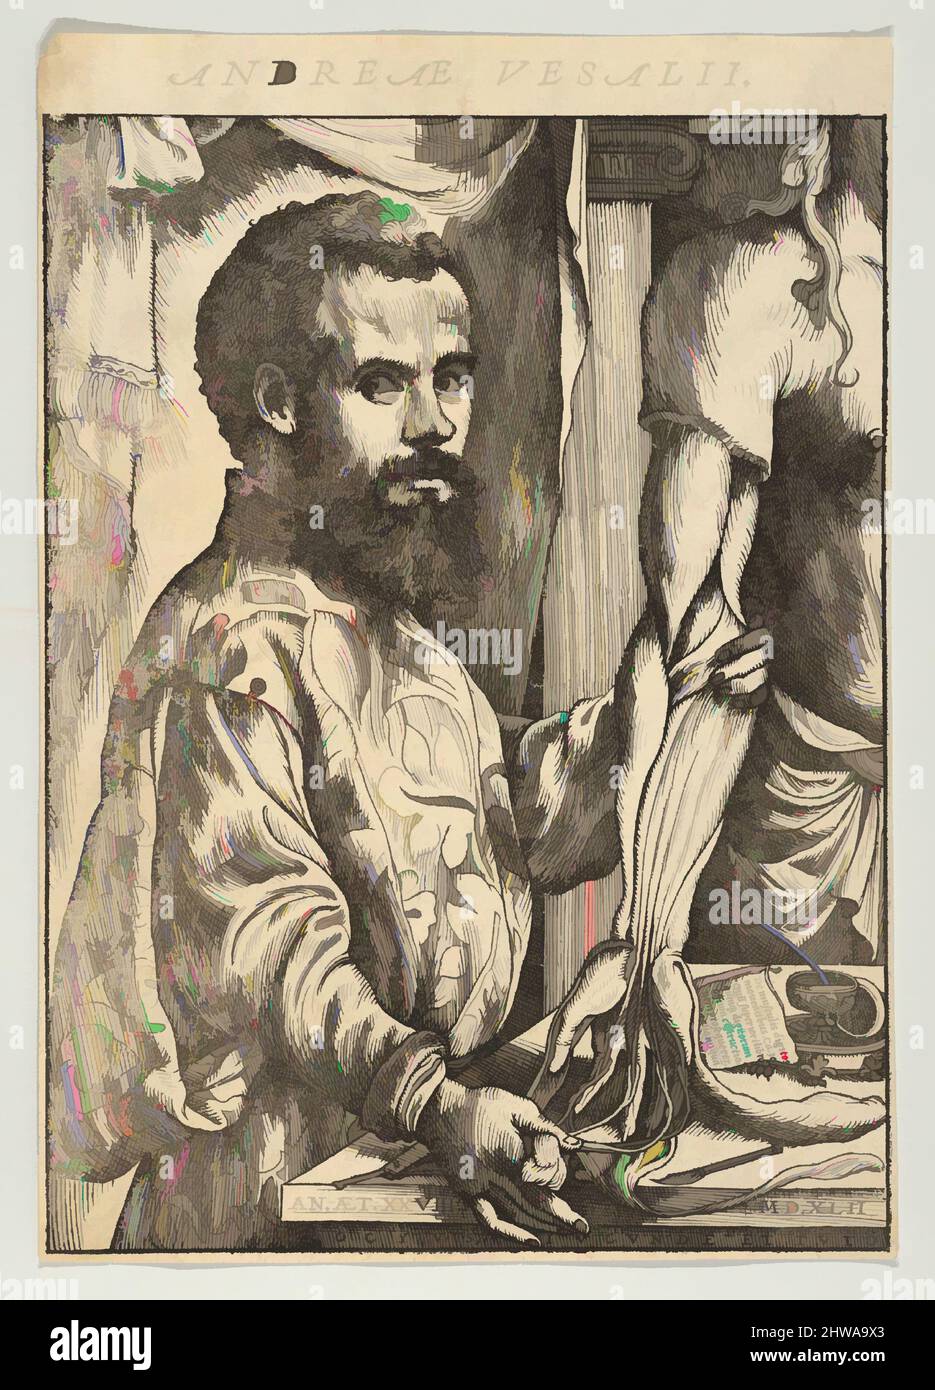 Art inspired by Drawings and Prints, Print, Portrait of Andreas Vesalius, half-length in profile standing in front of a table, Classic works modernized by Artotop with a splash of modernity. Shapes, color and value, eye-catching visual impact on art. Emotions through freedom of artworks in a contemporary way. A timeless message pursuing a wildly creative new direction. Artists turning to the digital medium and creating the Artotop NFT Stock Photo